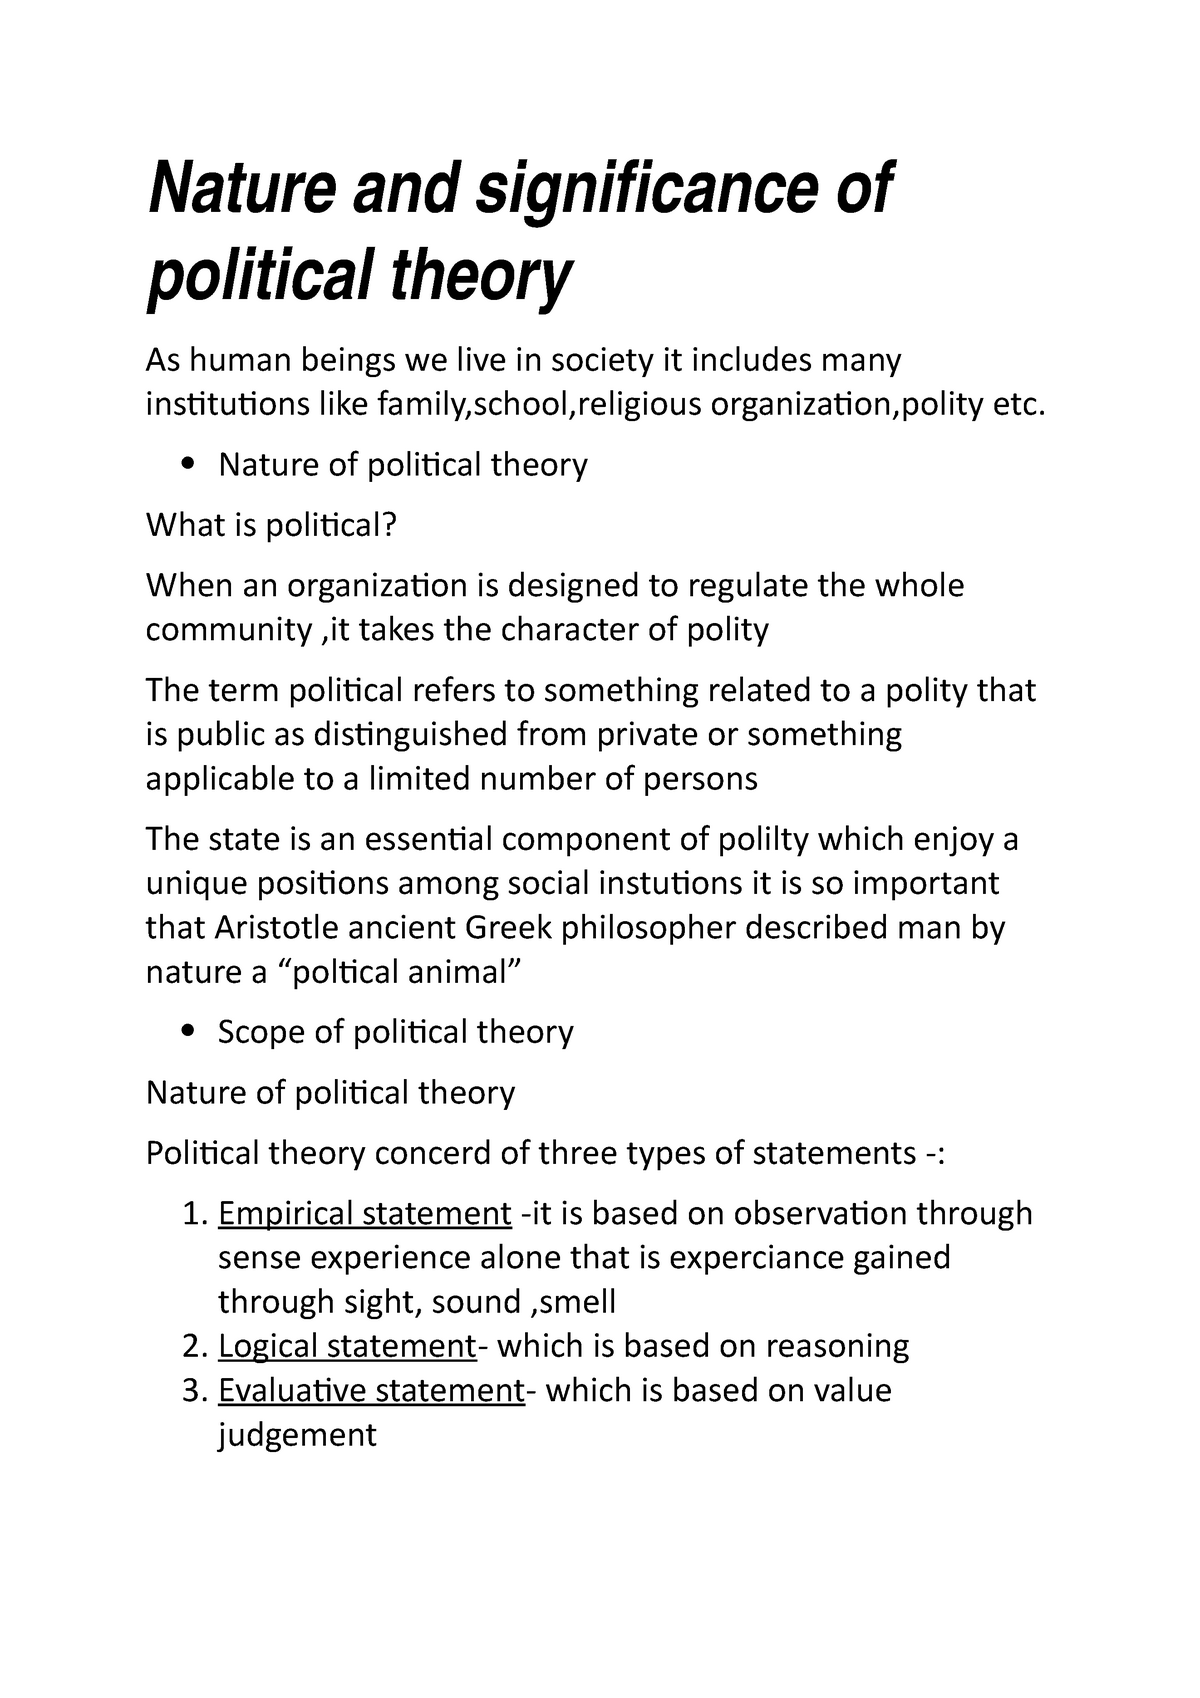 new essays in the legal and political theory of property